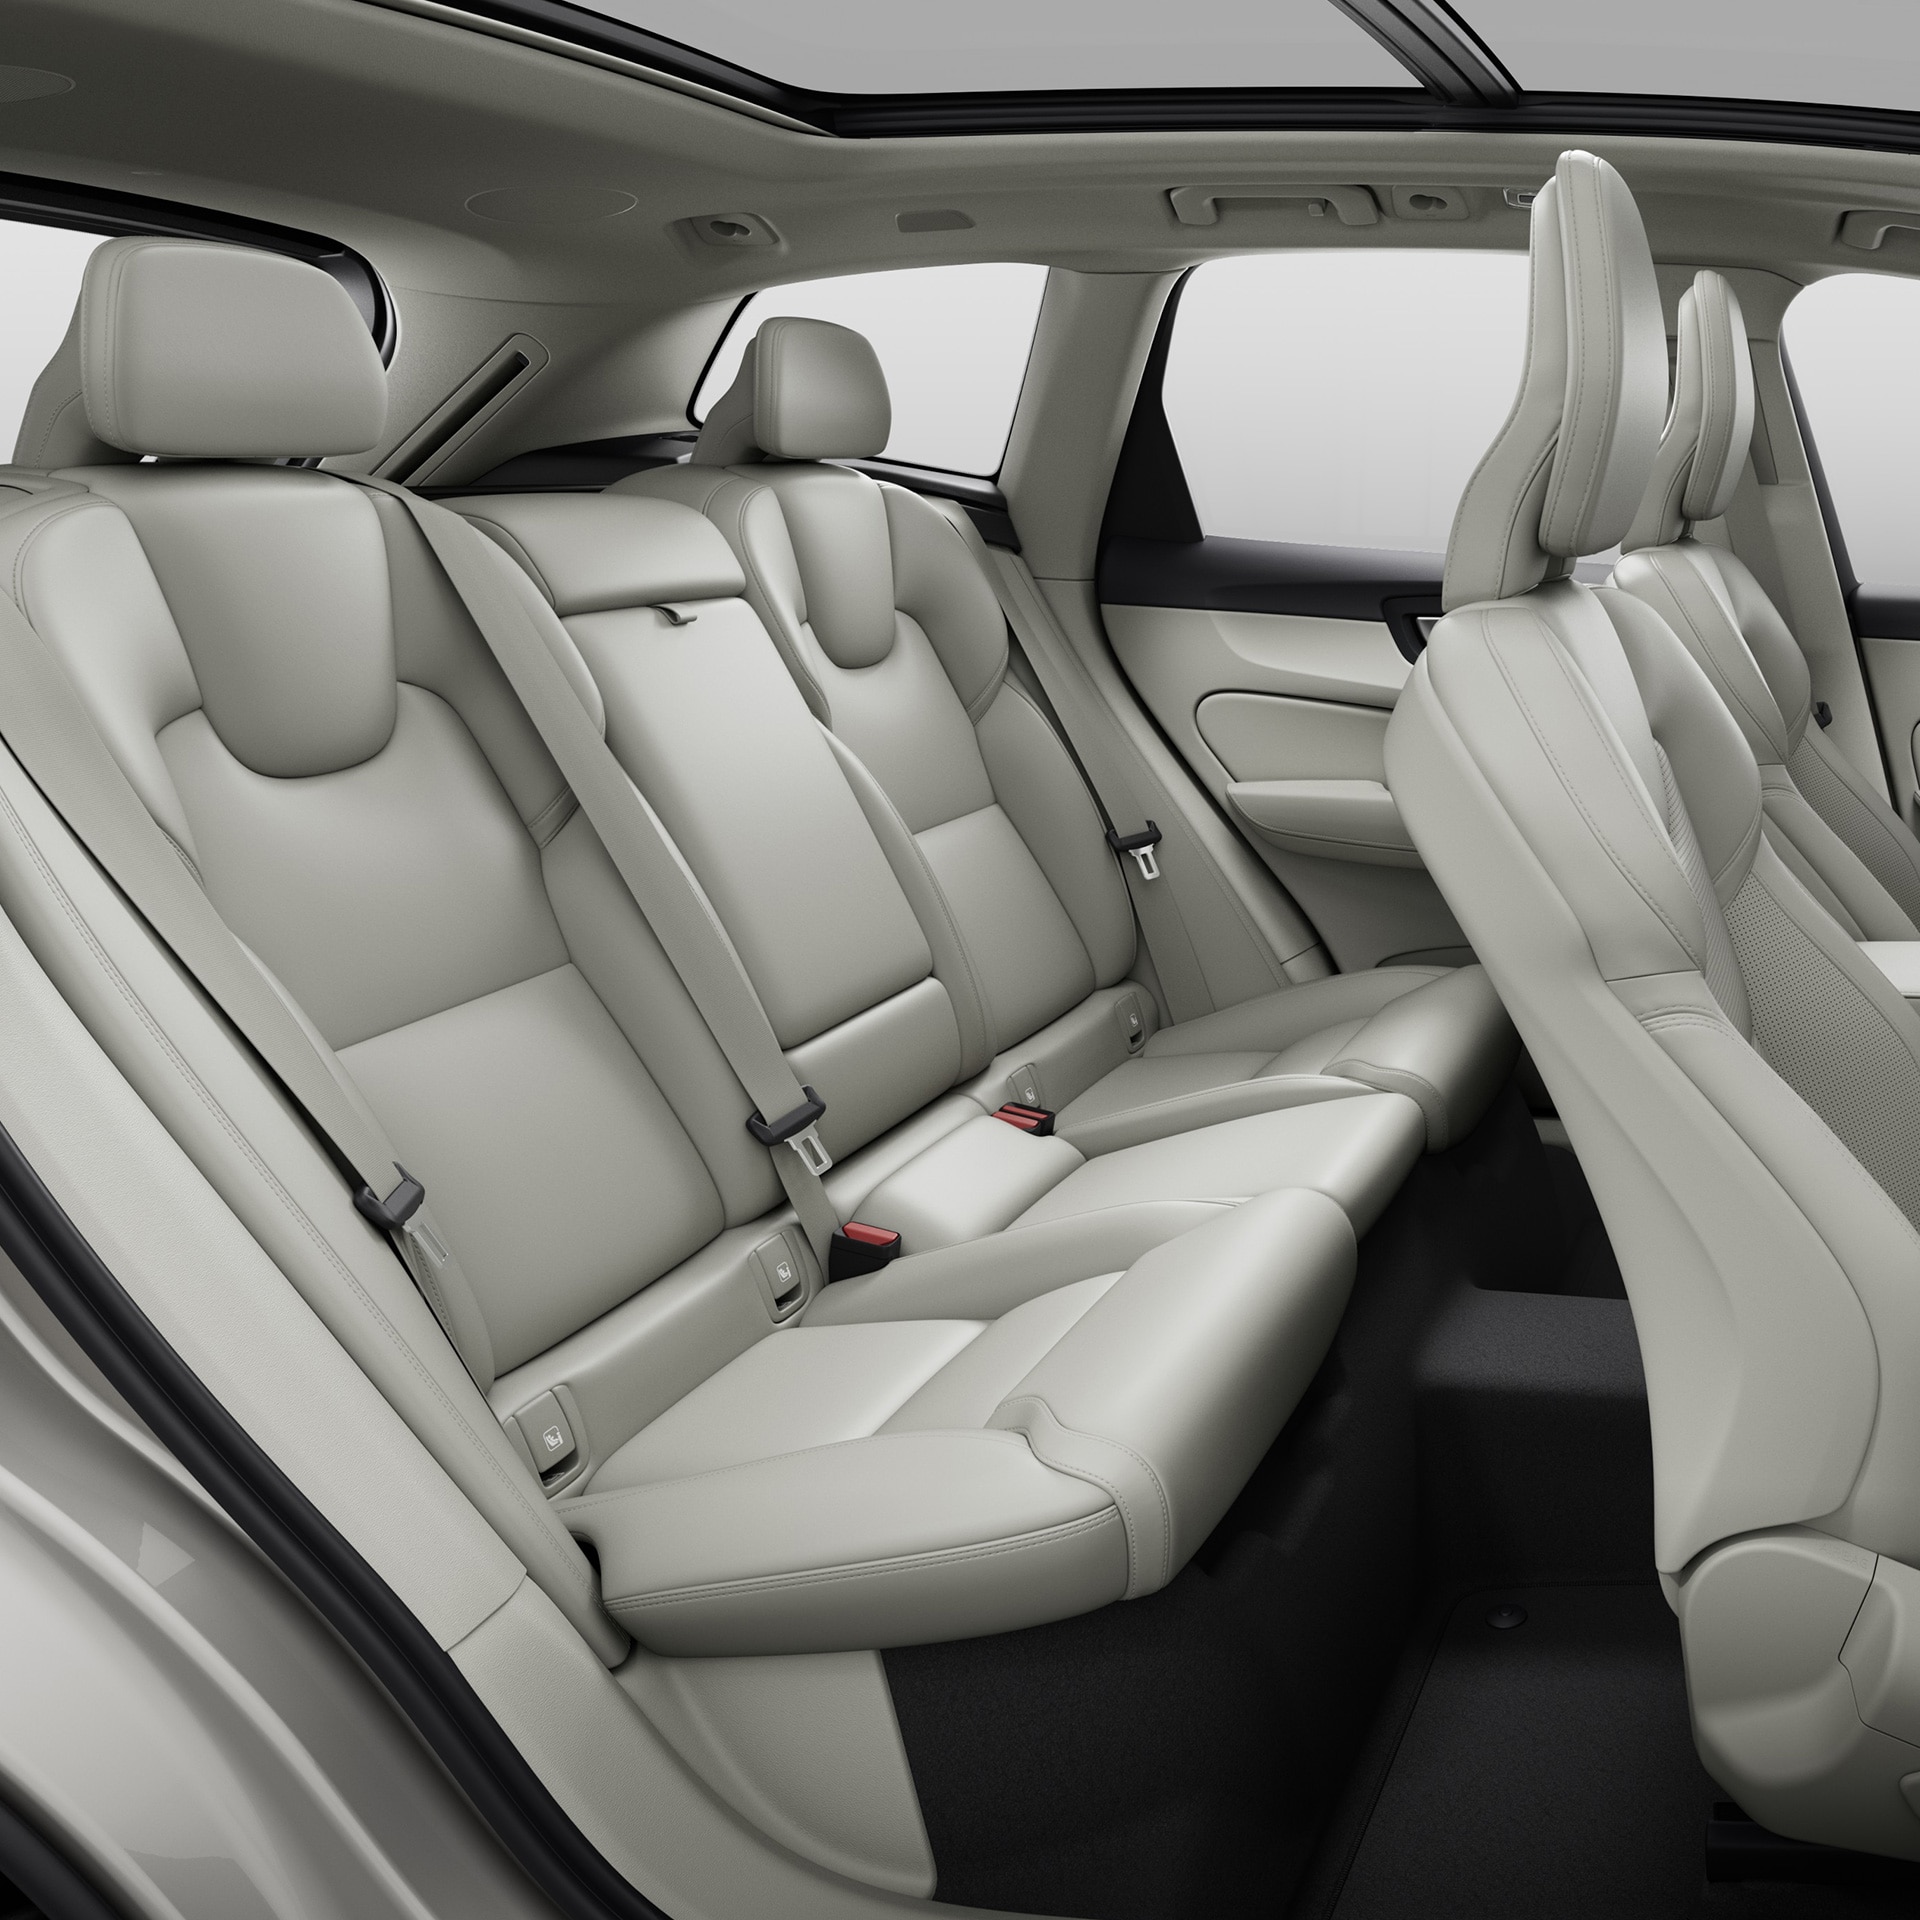 Side view of interior of Volvo XC60.